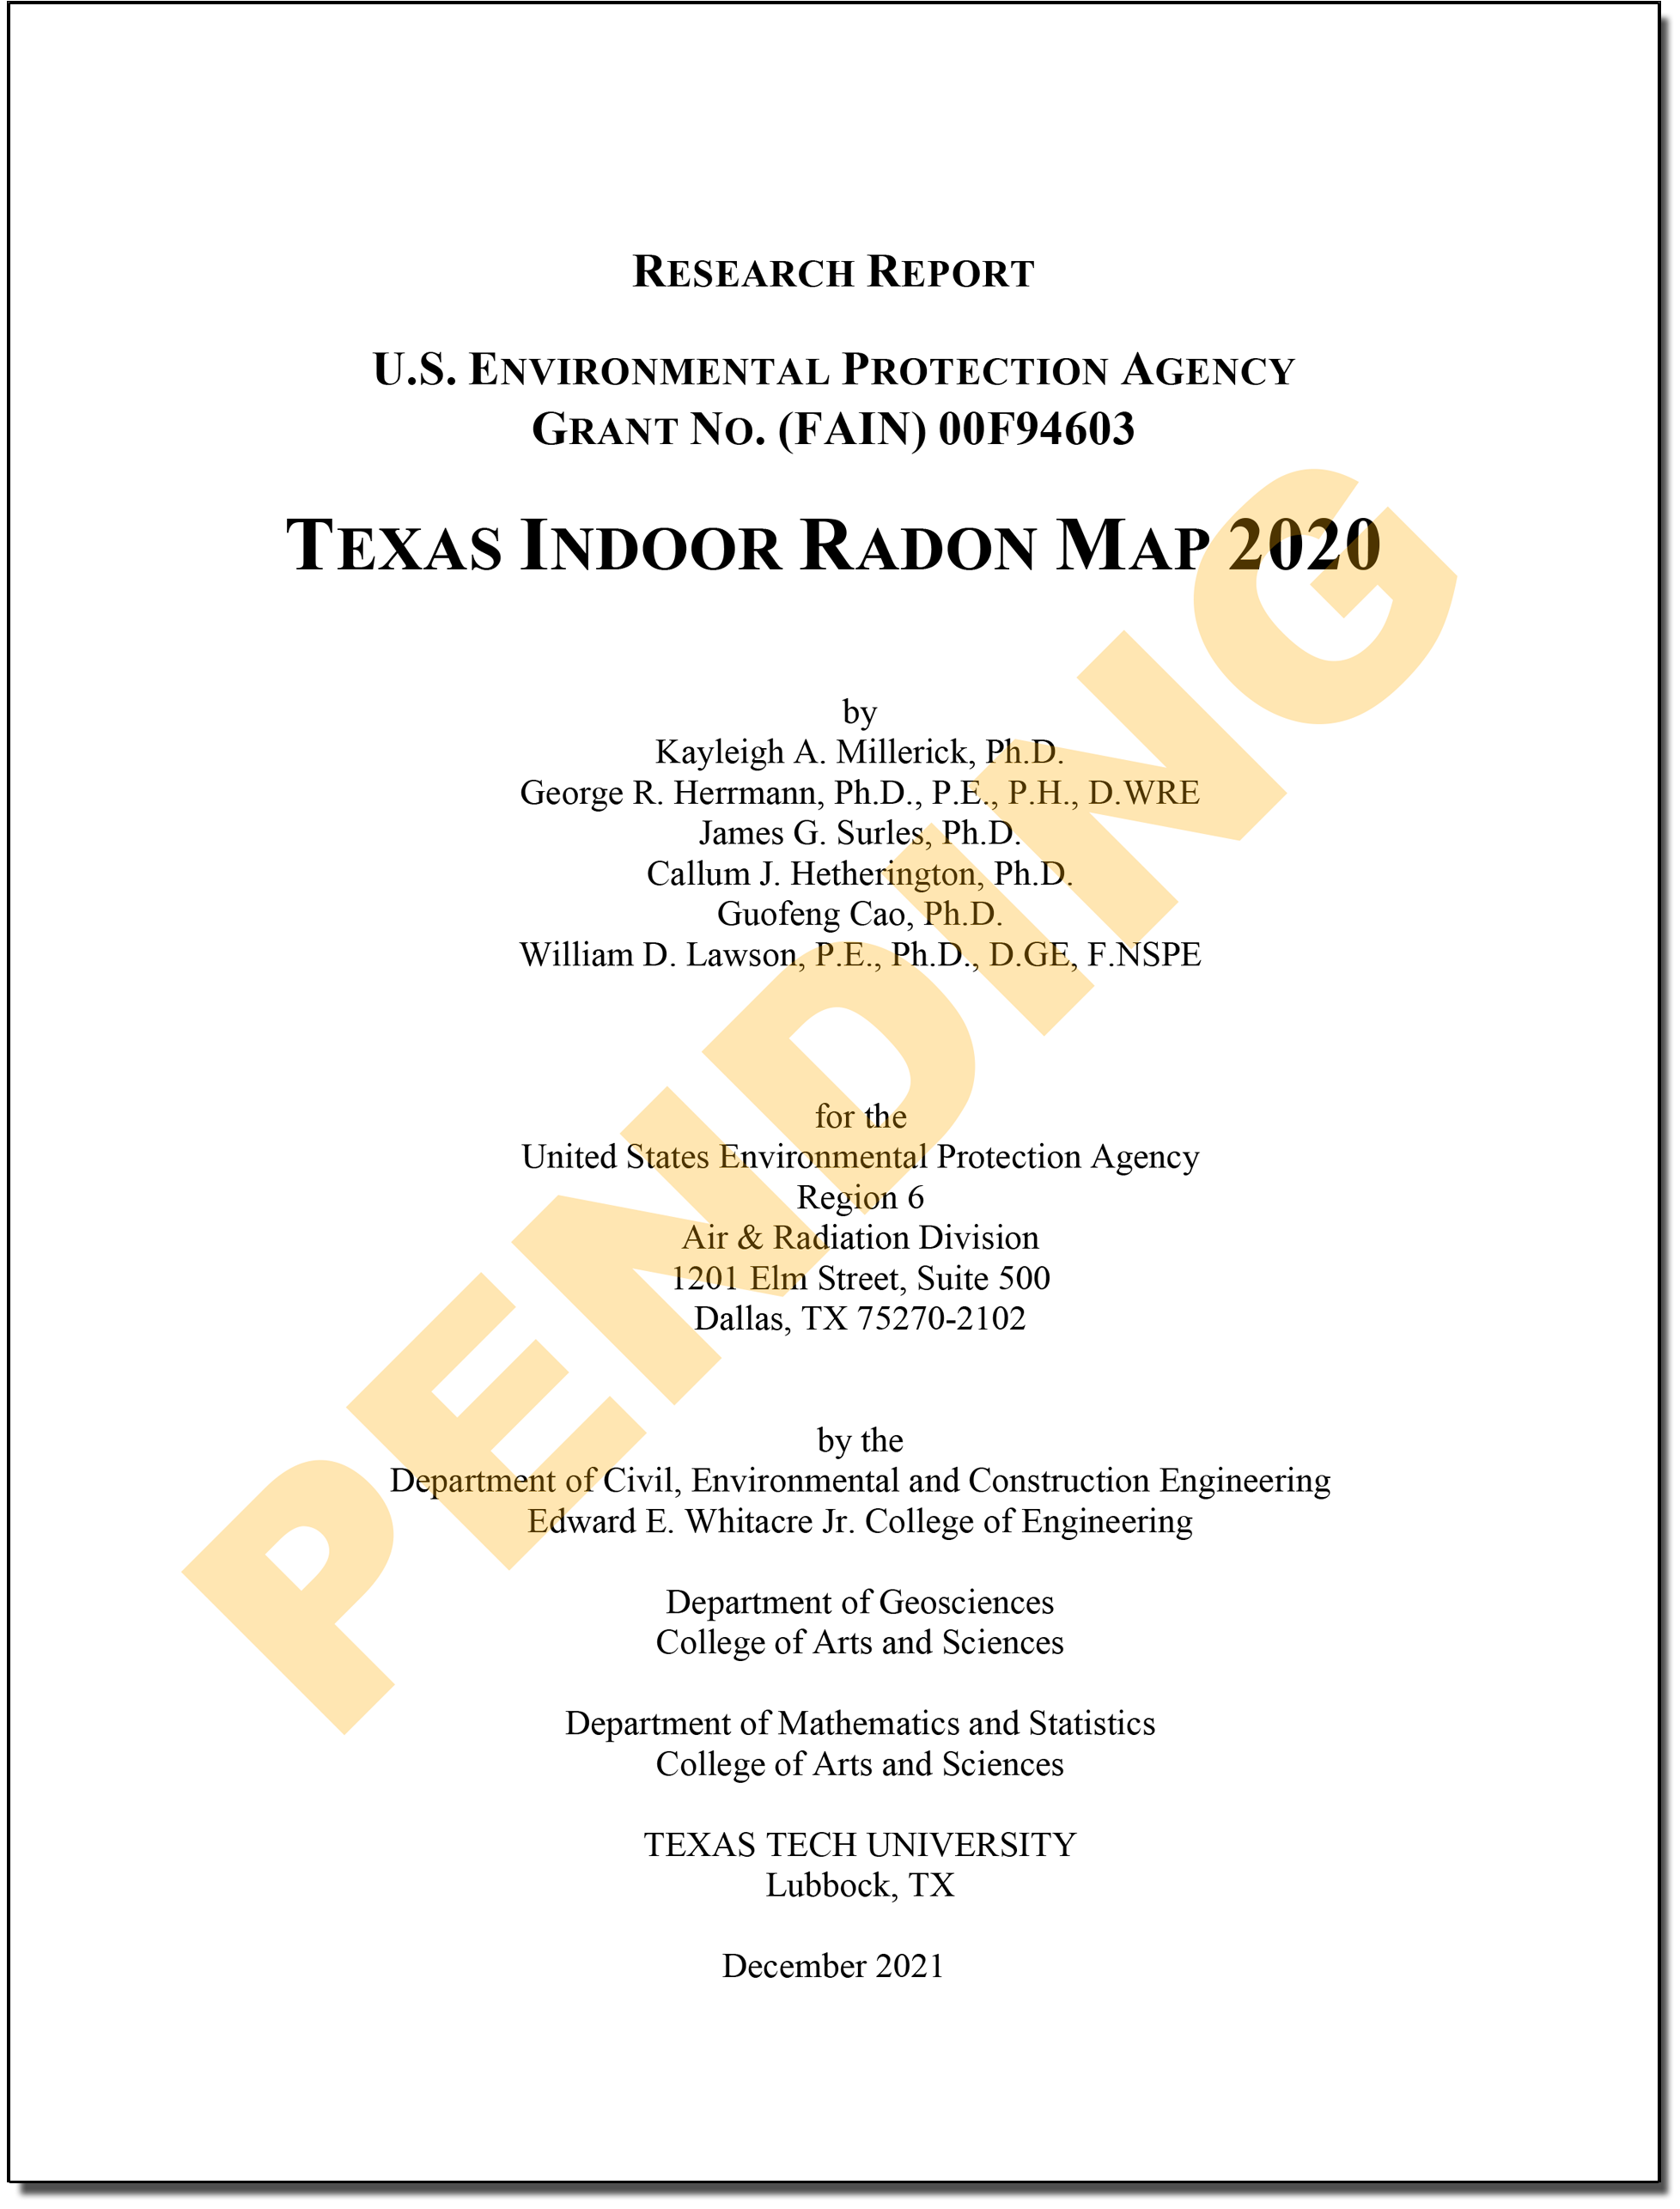 Texas Radon Group's cover page research report map of radon zones in texas 2020